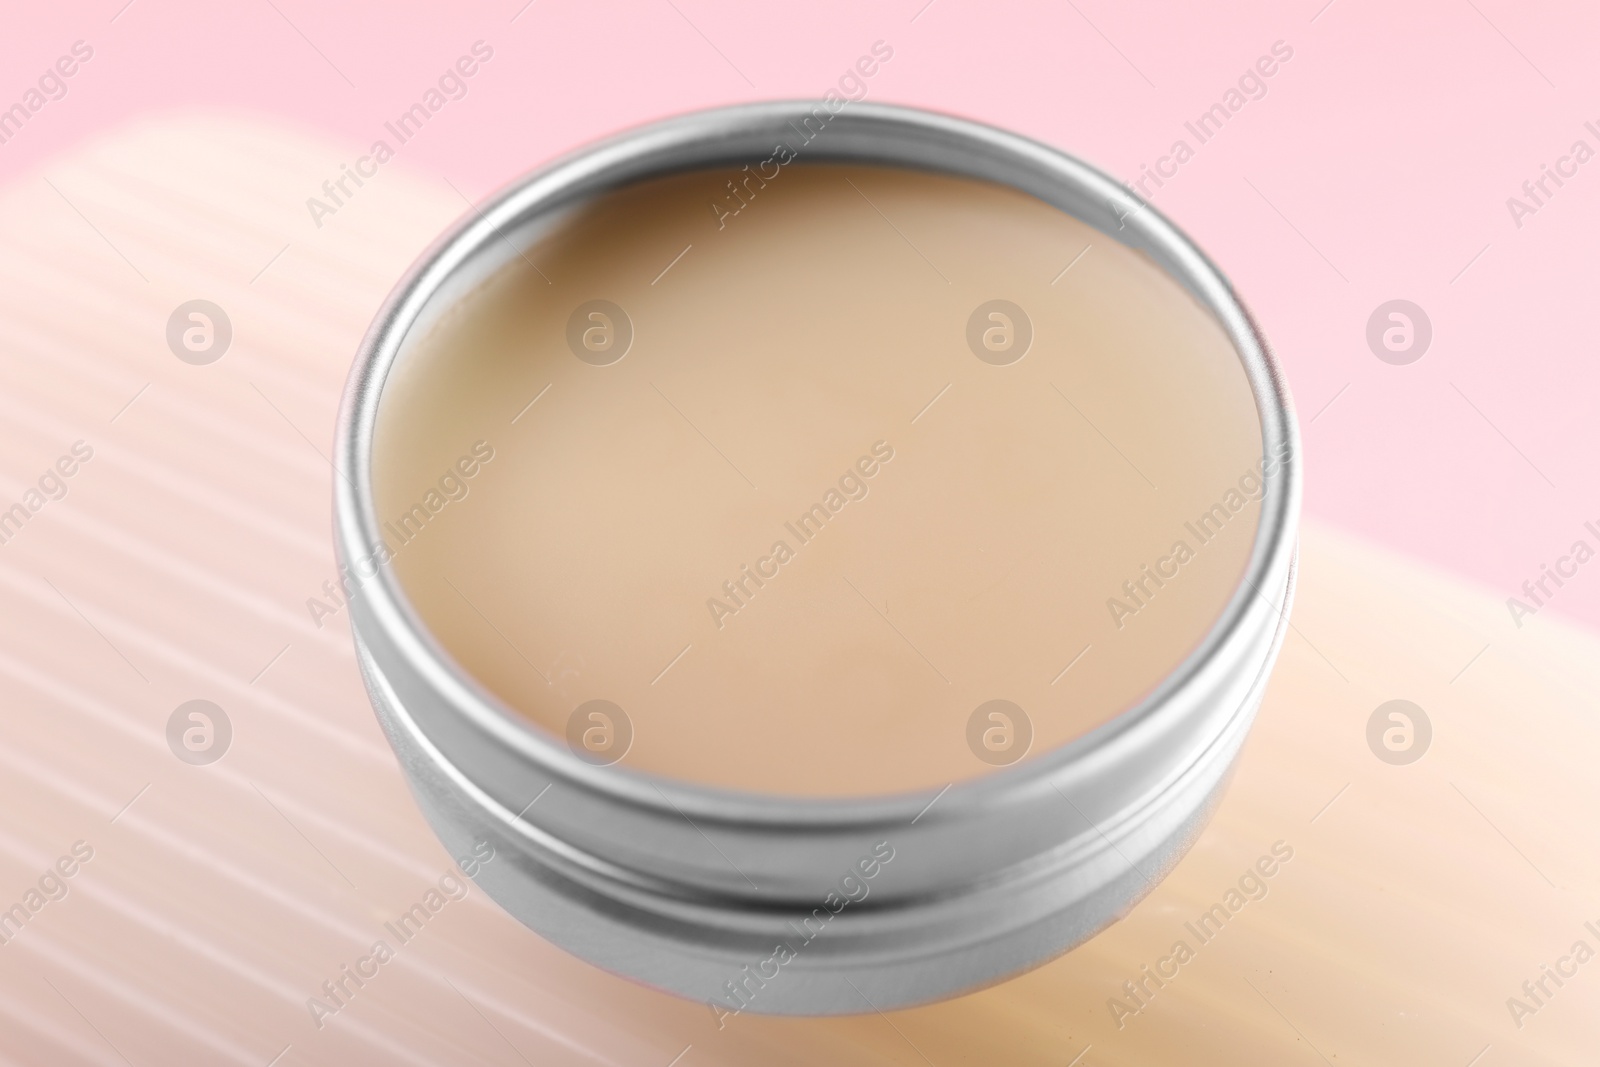 Photo of Lip balm on pink background, closeup view